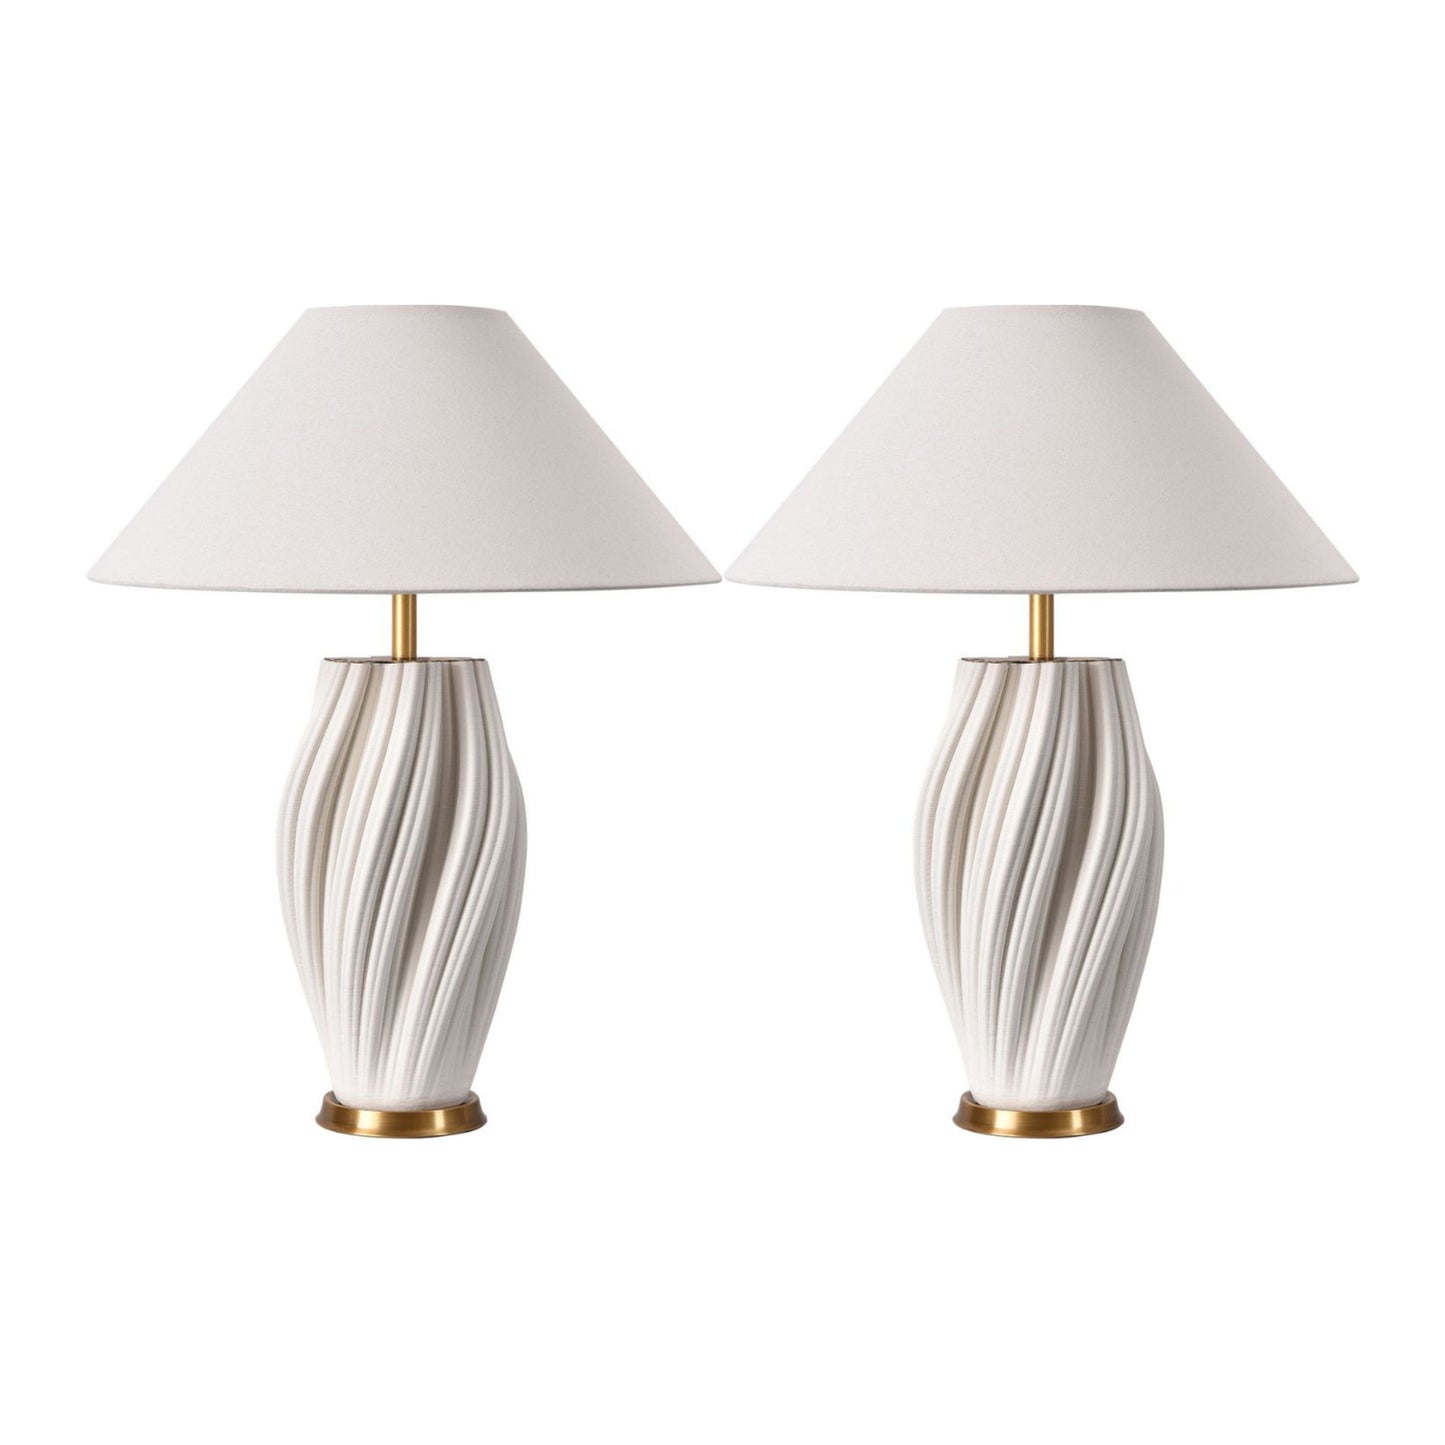 Set of Two 24" White Ceramic Bedside Table Lamps With White Empire Shade